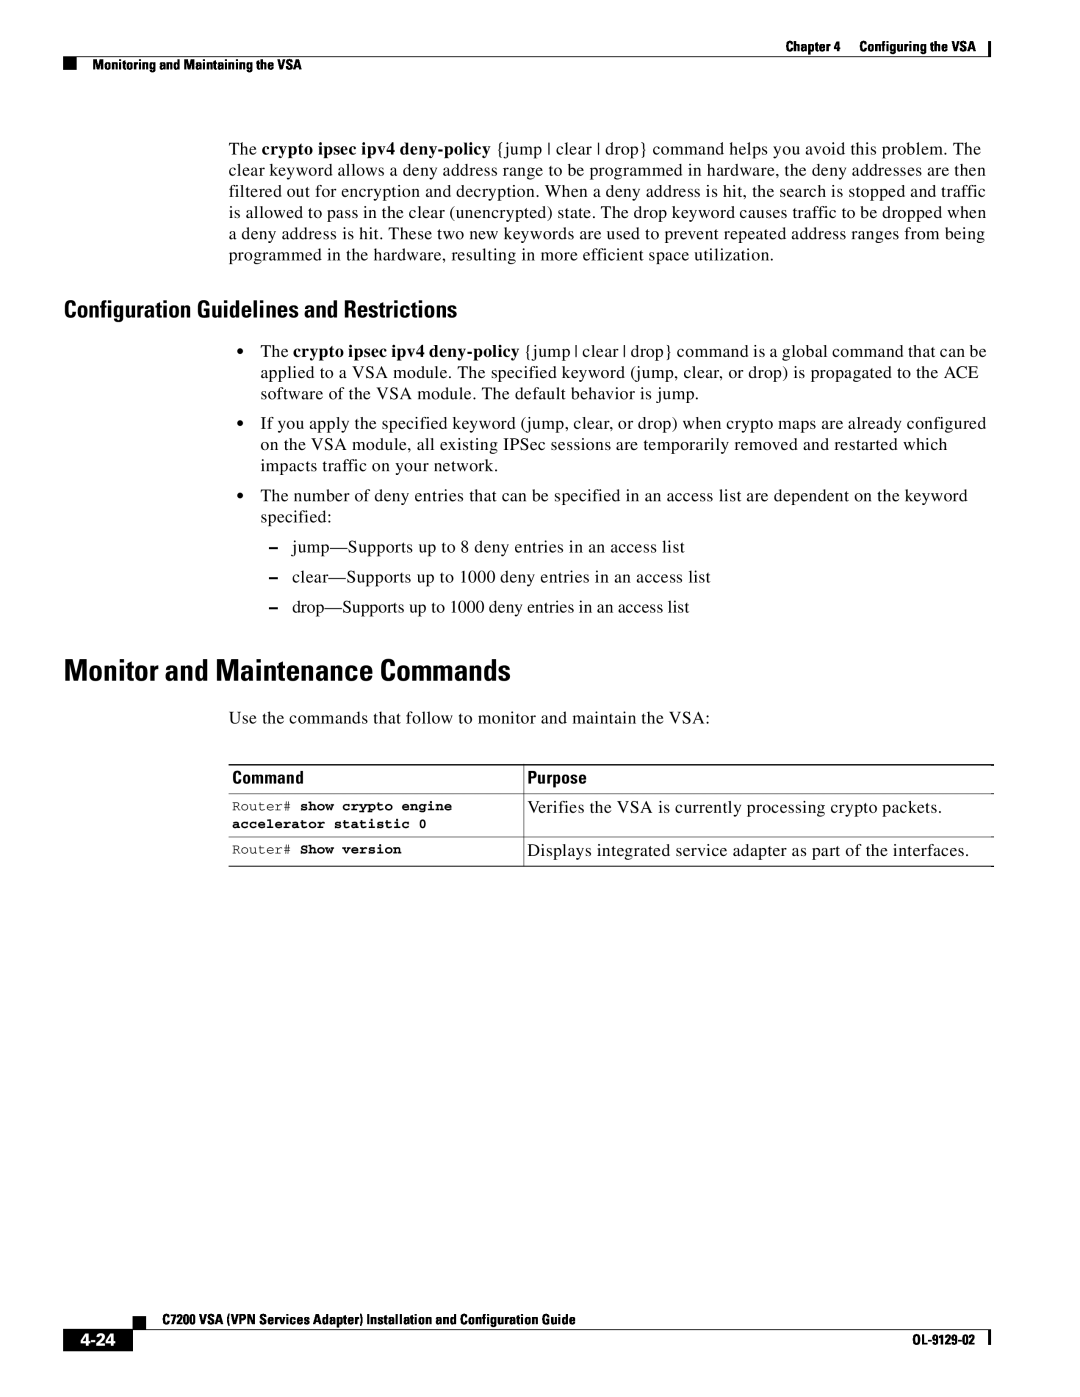 Cisco Systems C7200 manual Monitor and Maintenance Commands, Configuration Guidelines and Restrictions, 4-24 